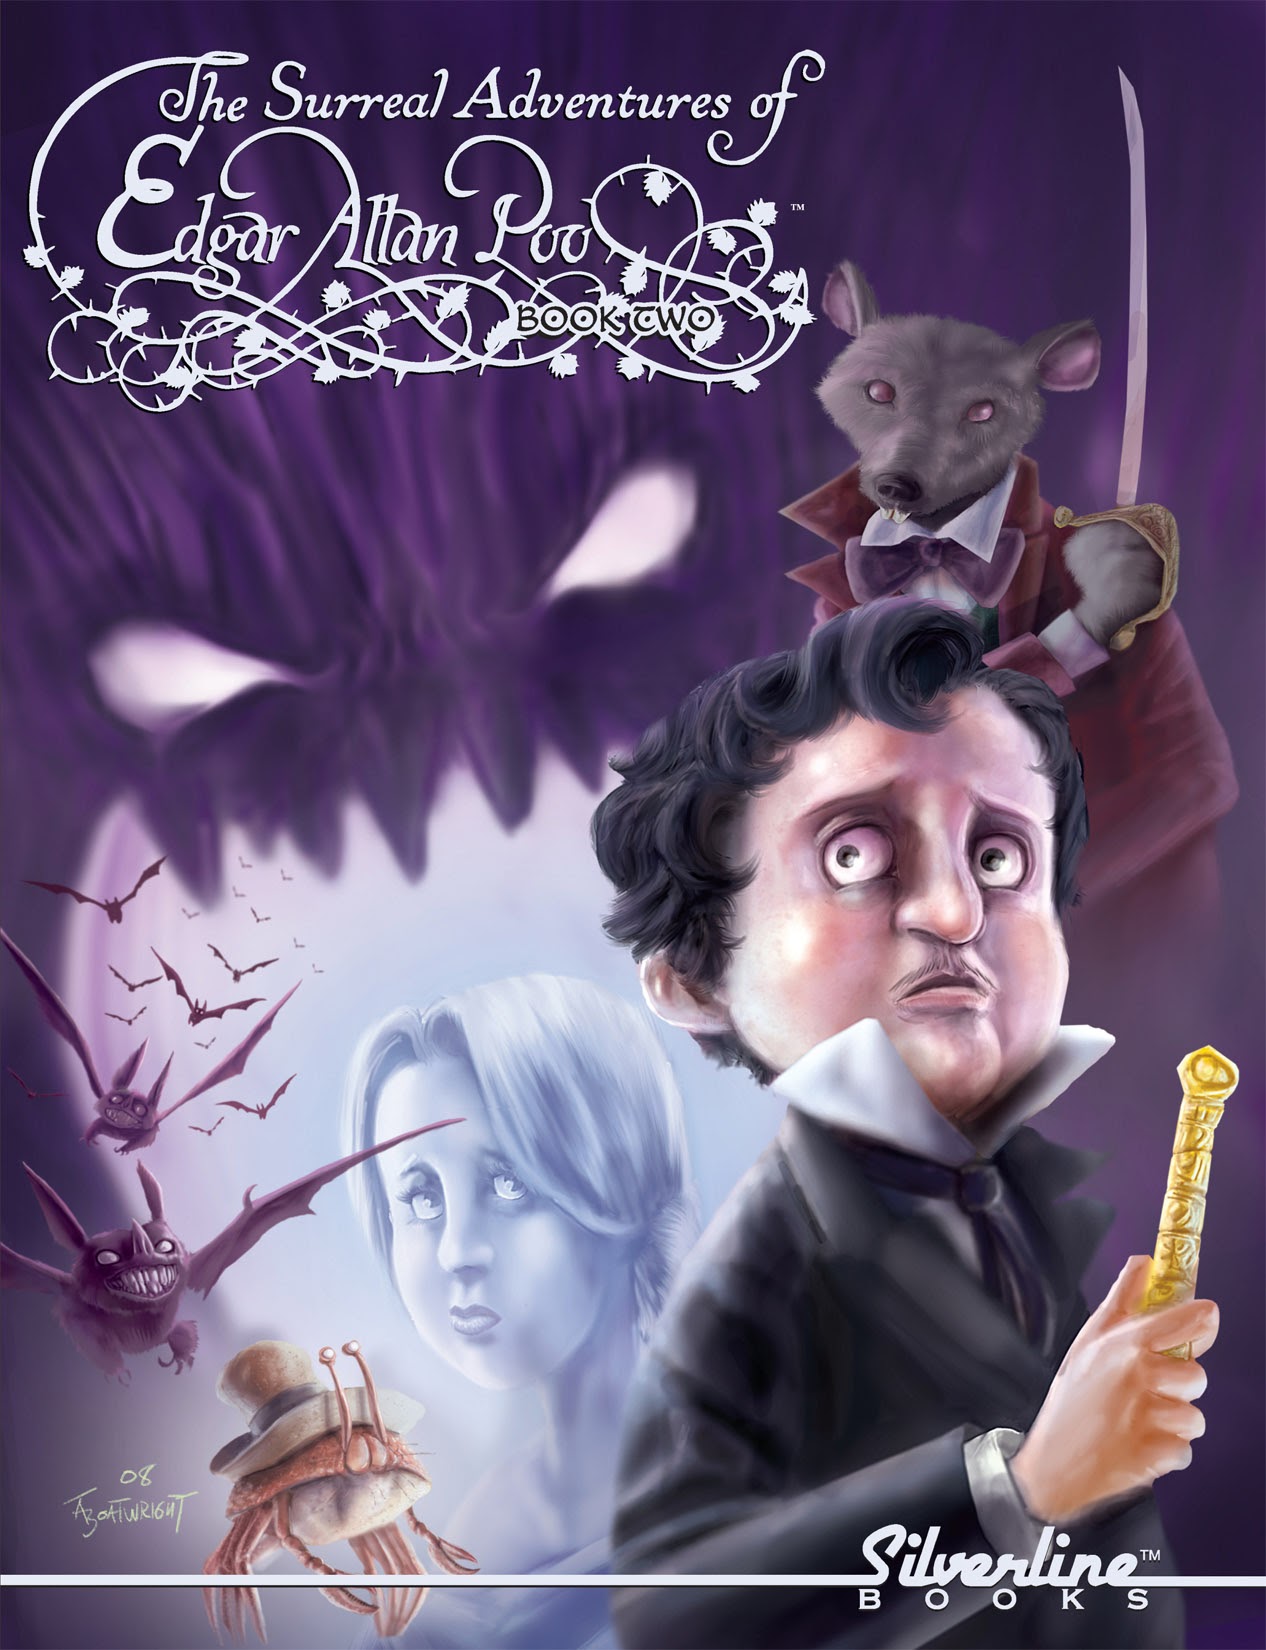 Read online The Surreal Adventures of Edgar Allan Poo comic -  Issue # TPB 2 - 1